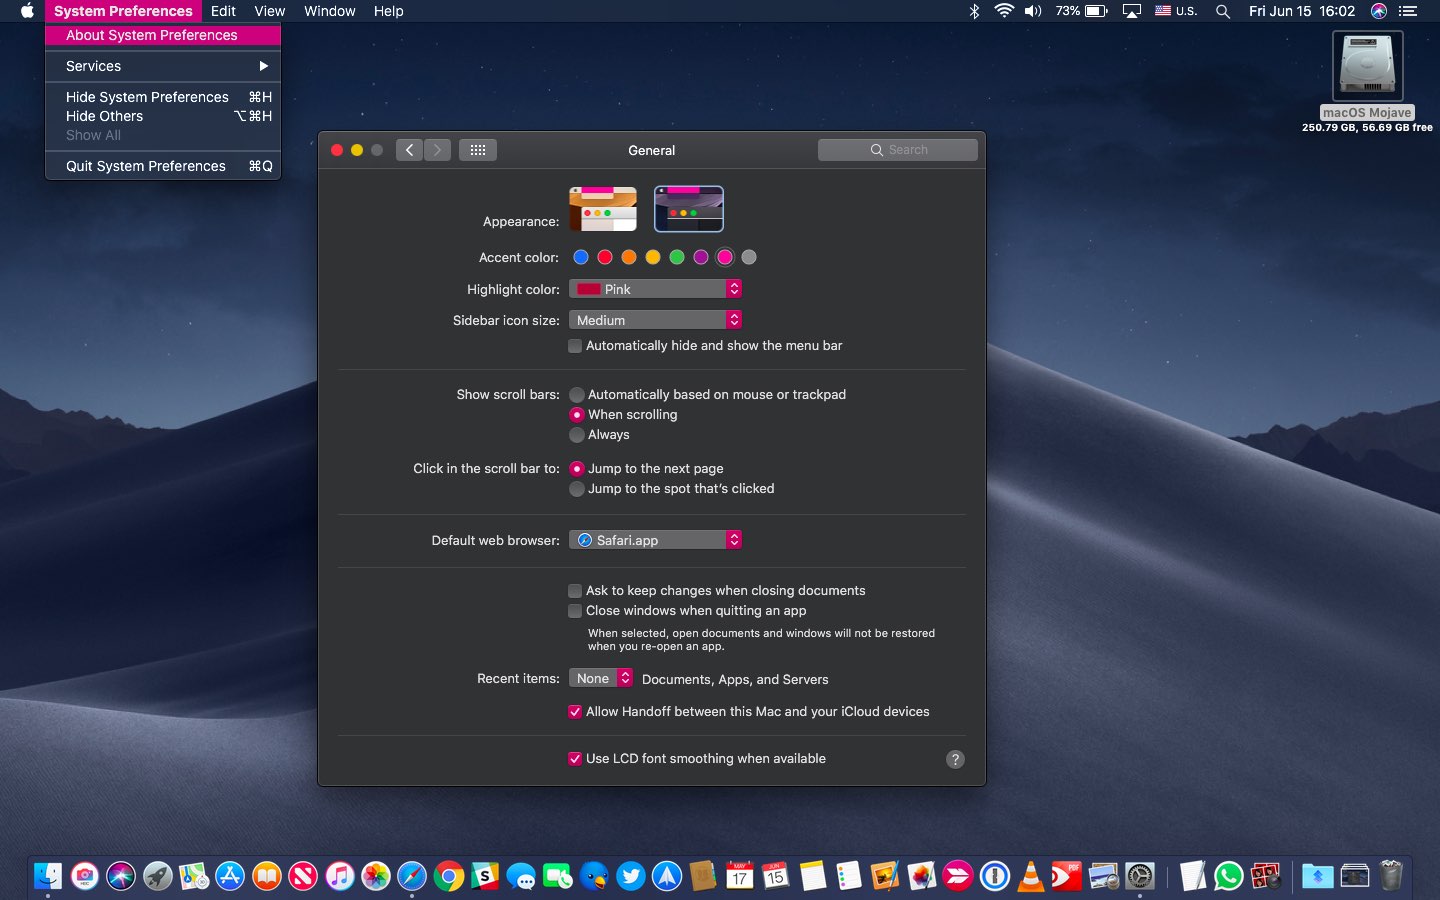 macOS Mojave Dark Mode with the pink accent and highlight color